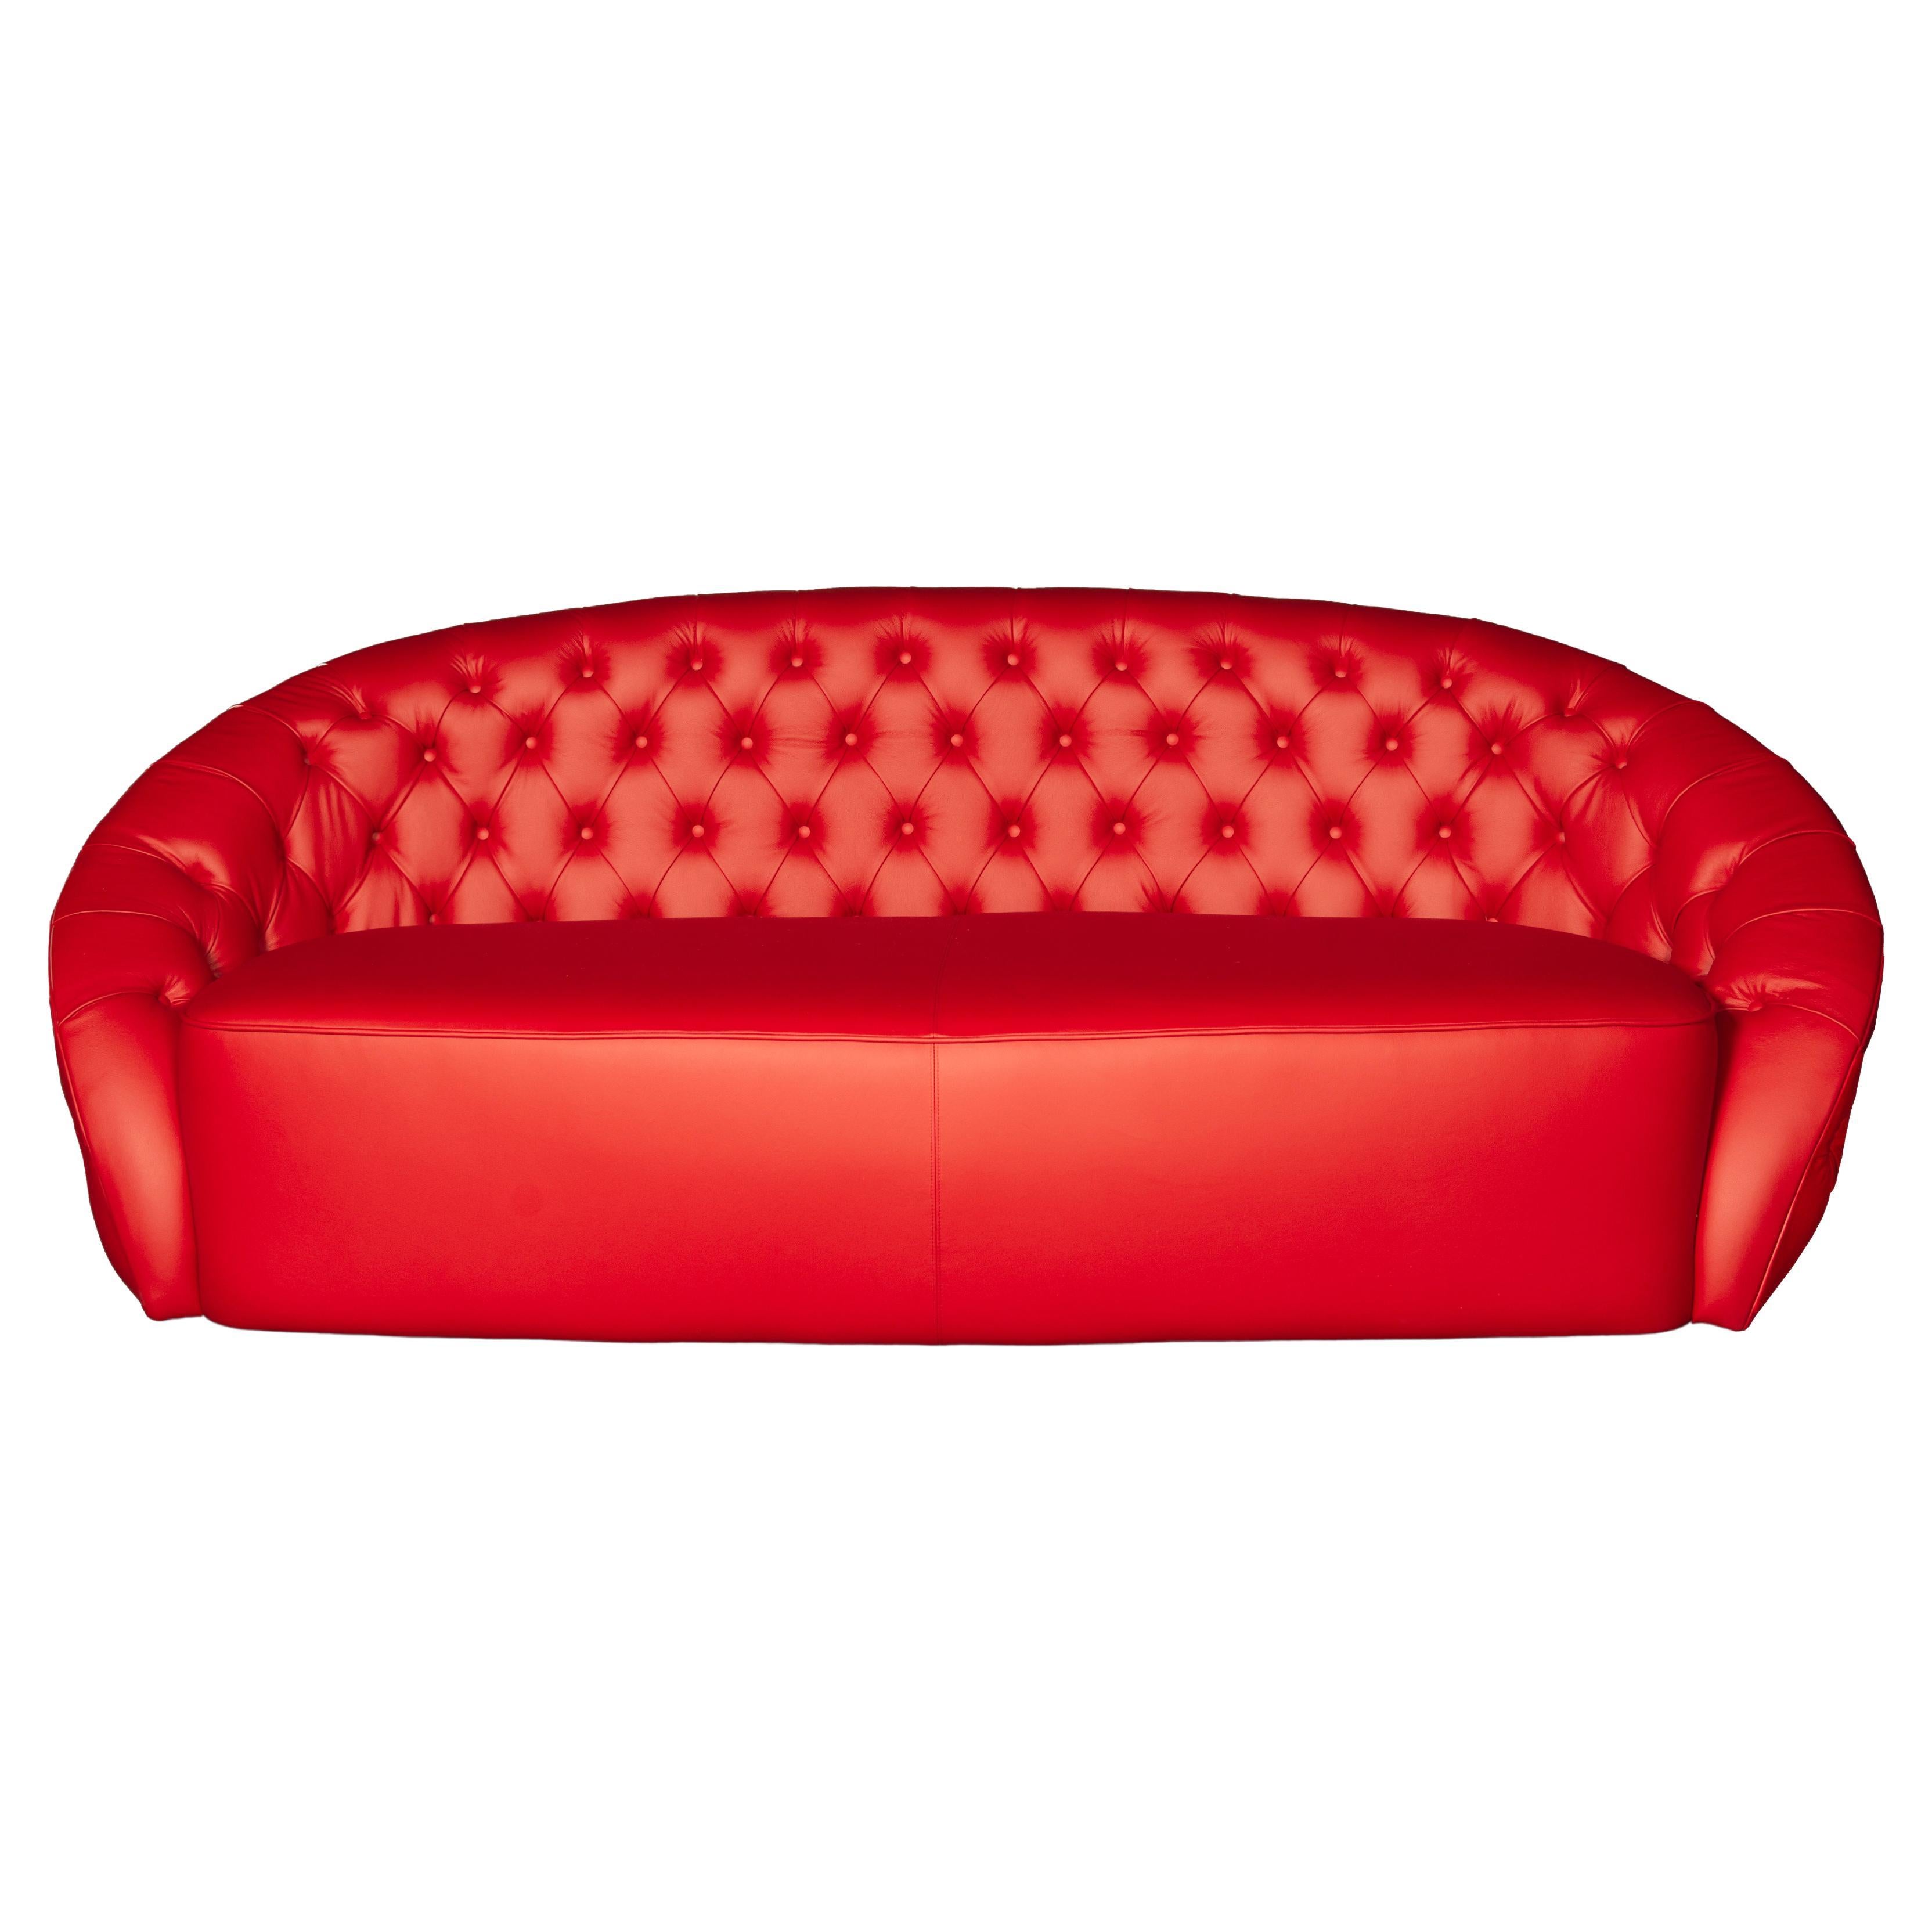 Canapé rond capitonné, cuir rouge, cm 210x115, Made in Italy